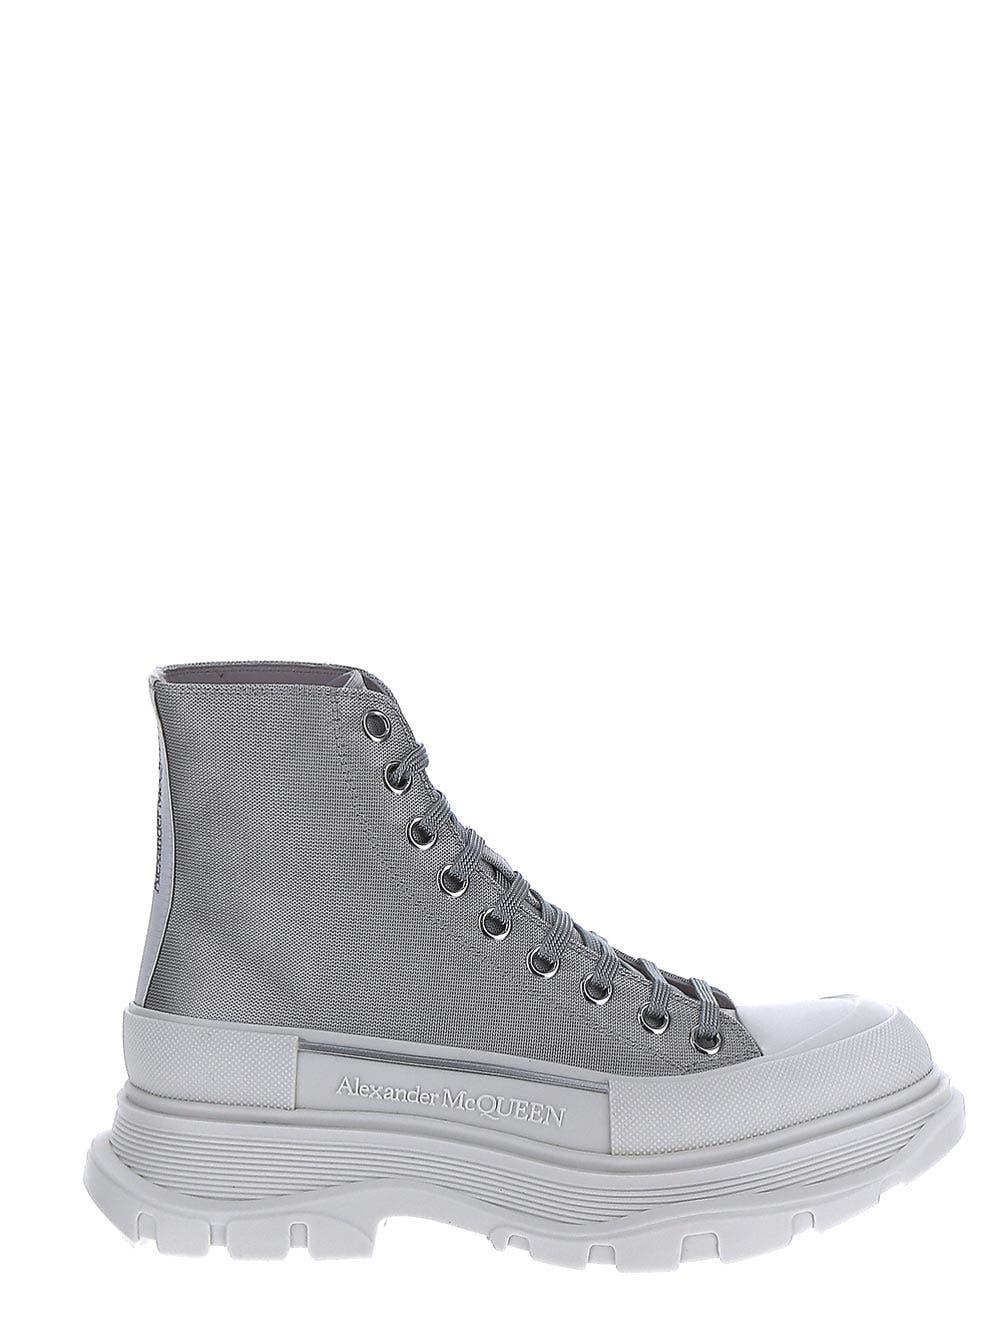 Alexander McQueen Silver Ankle Boots